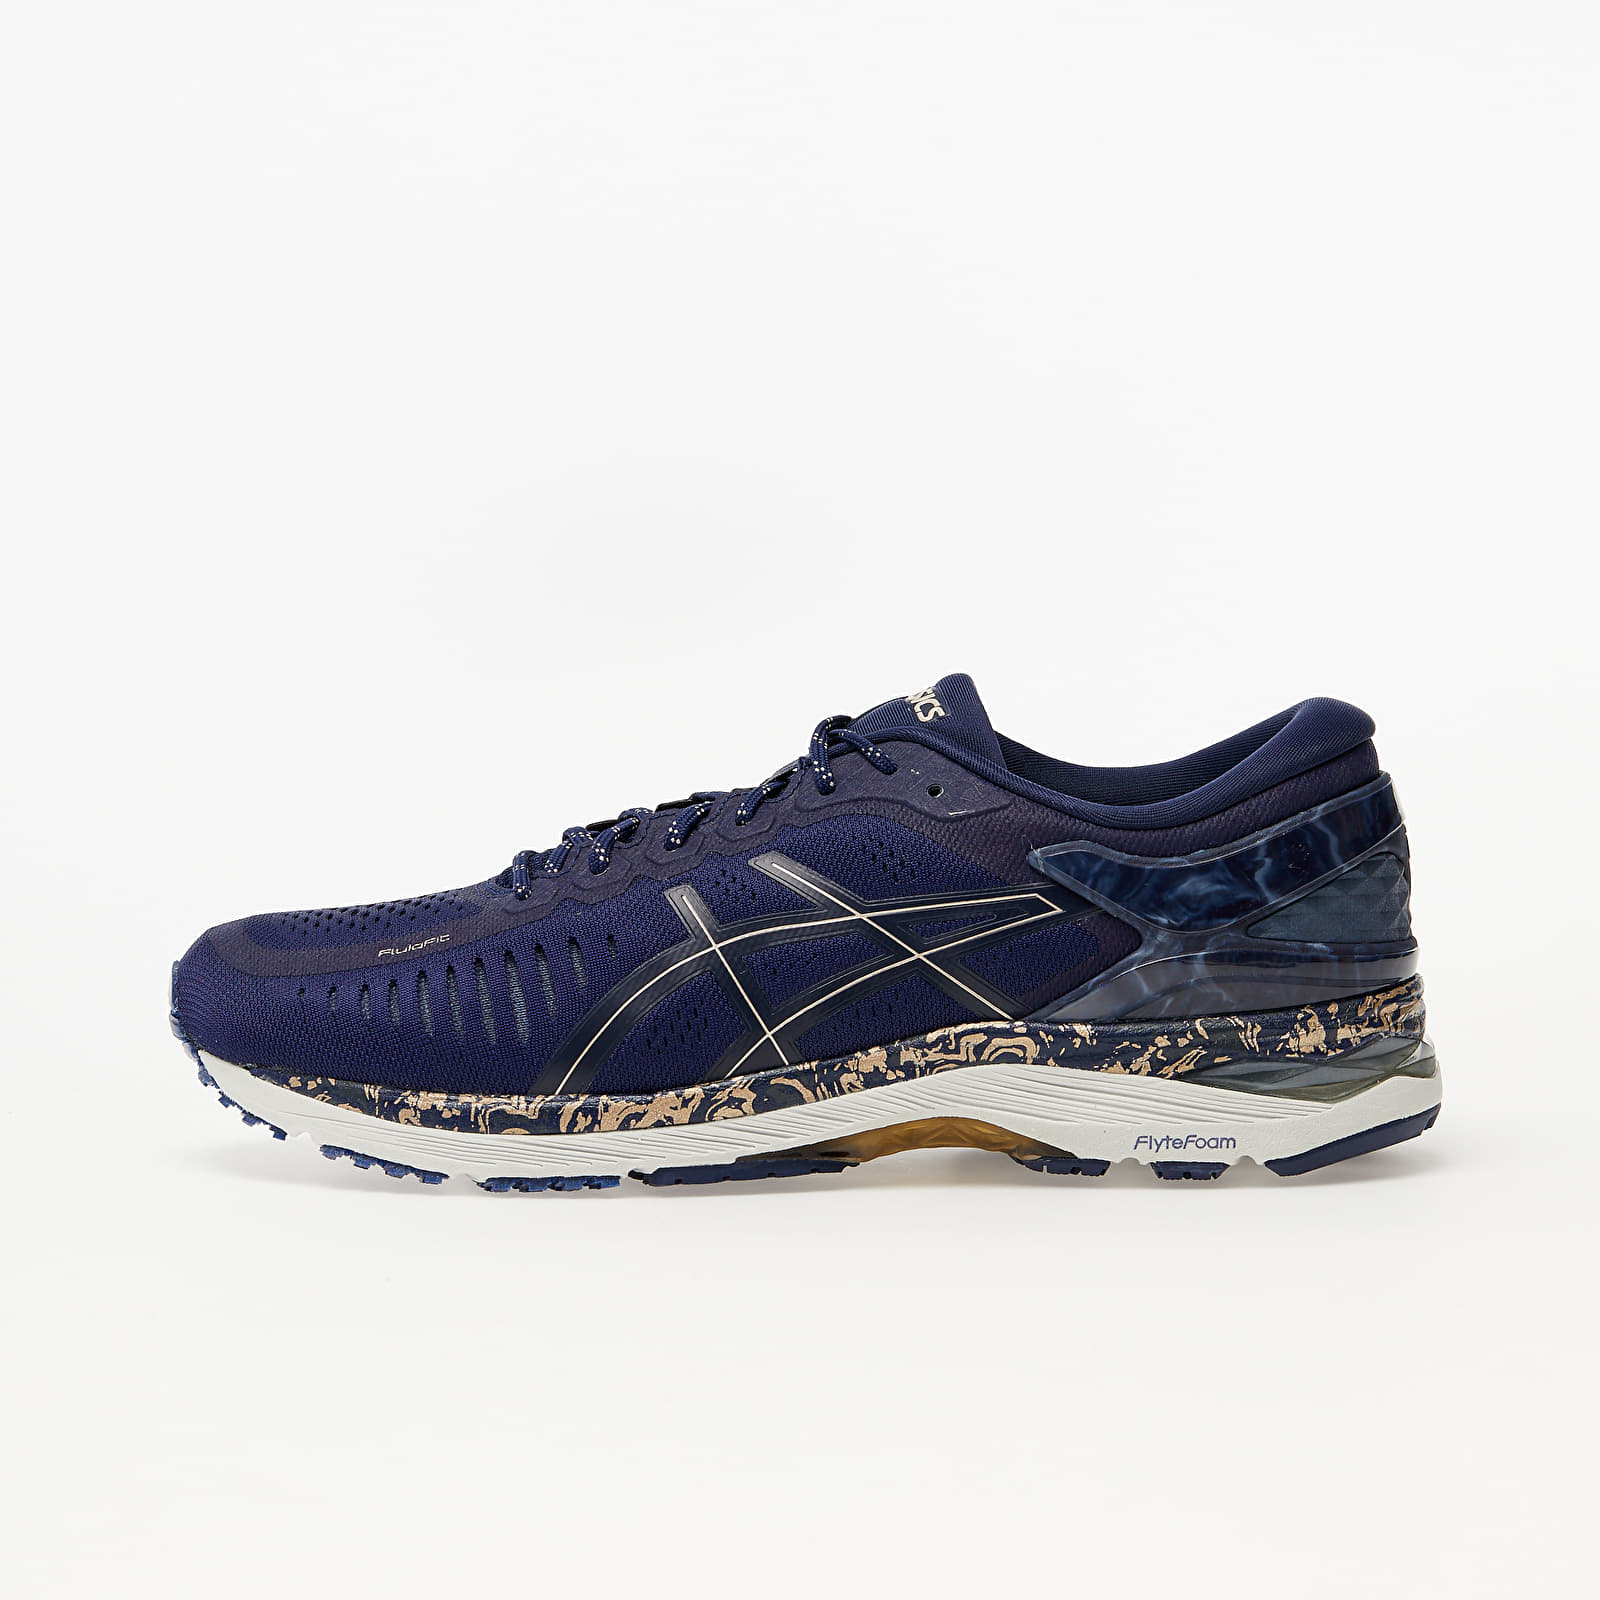 Asics MetaRun Peacoat/ Frosted Almond 1011A603-400